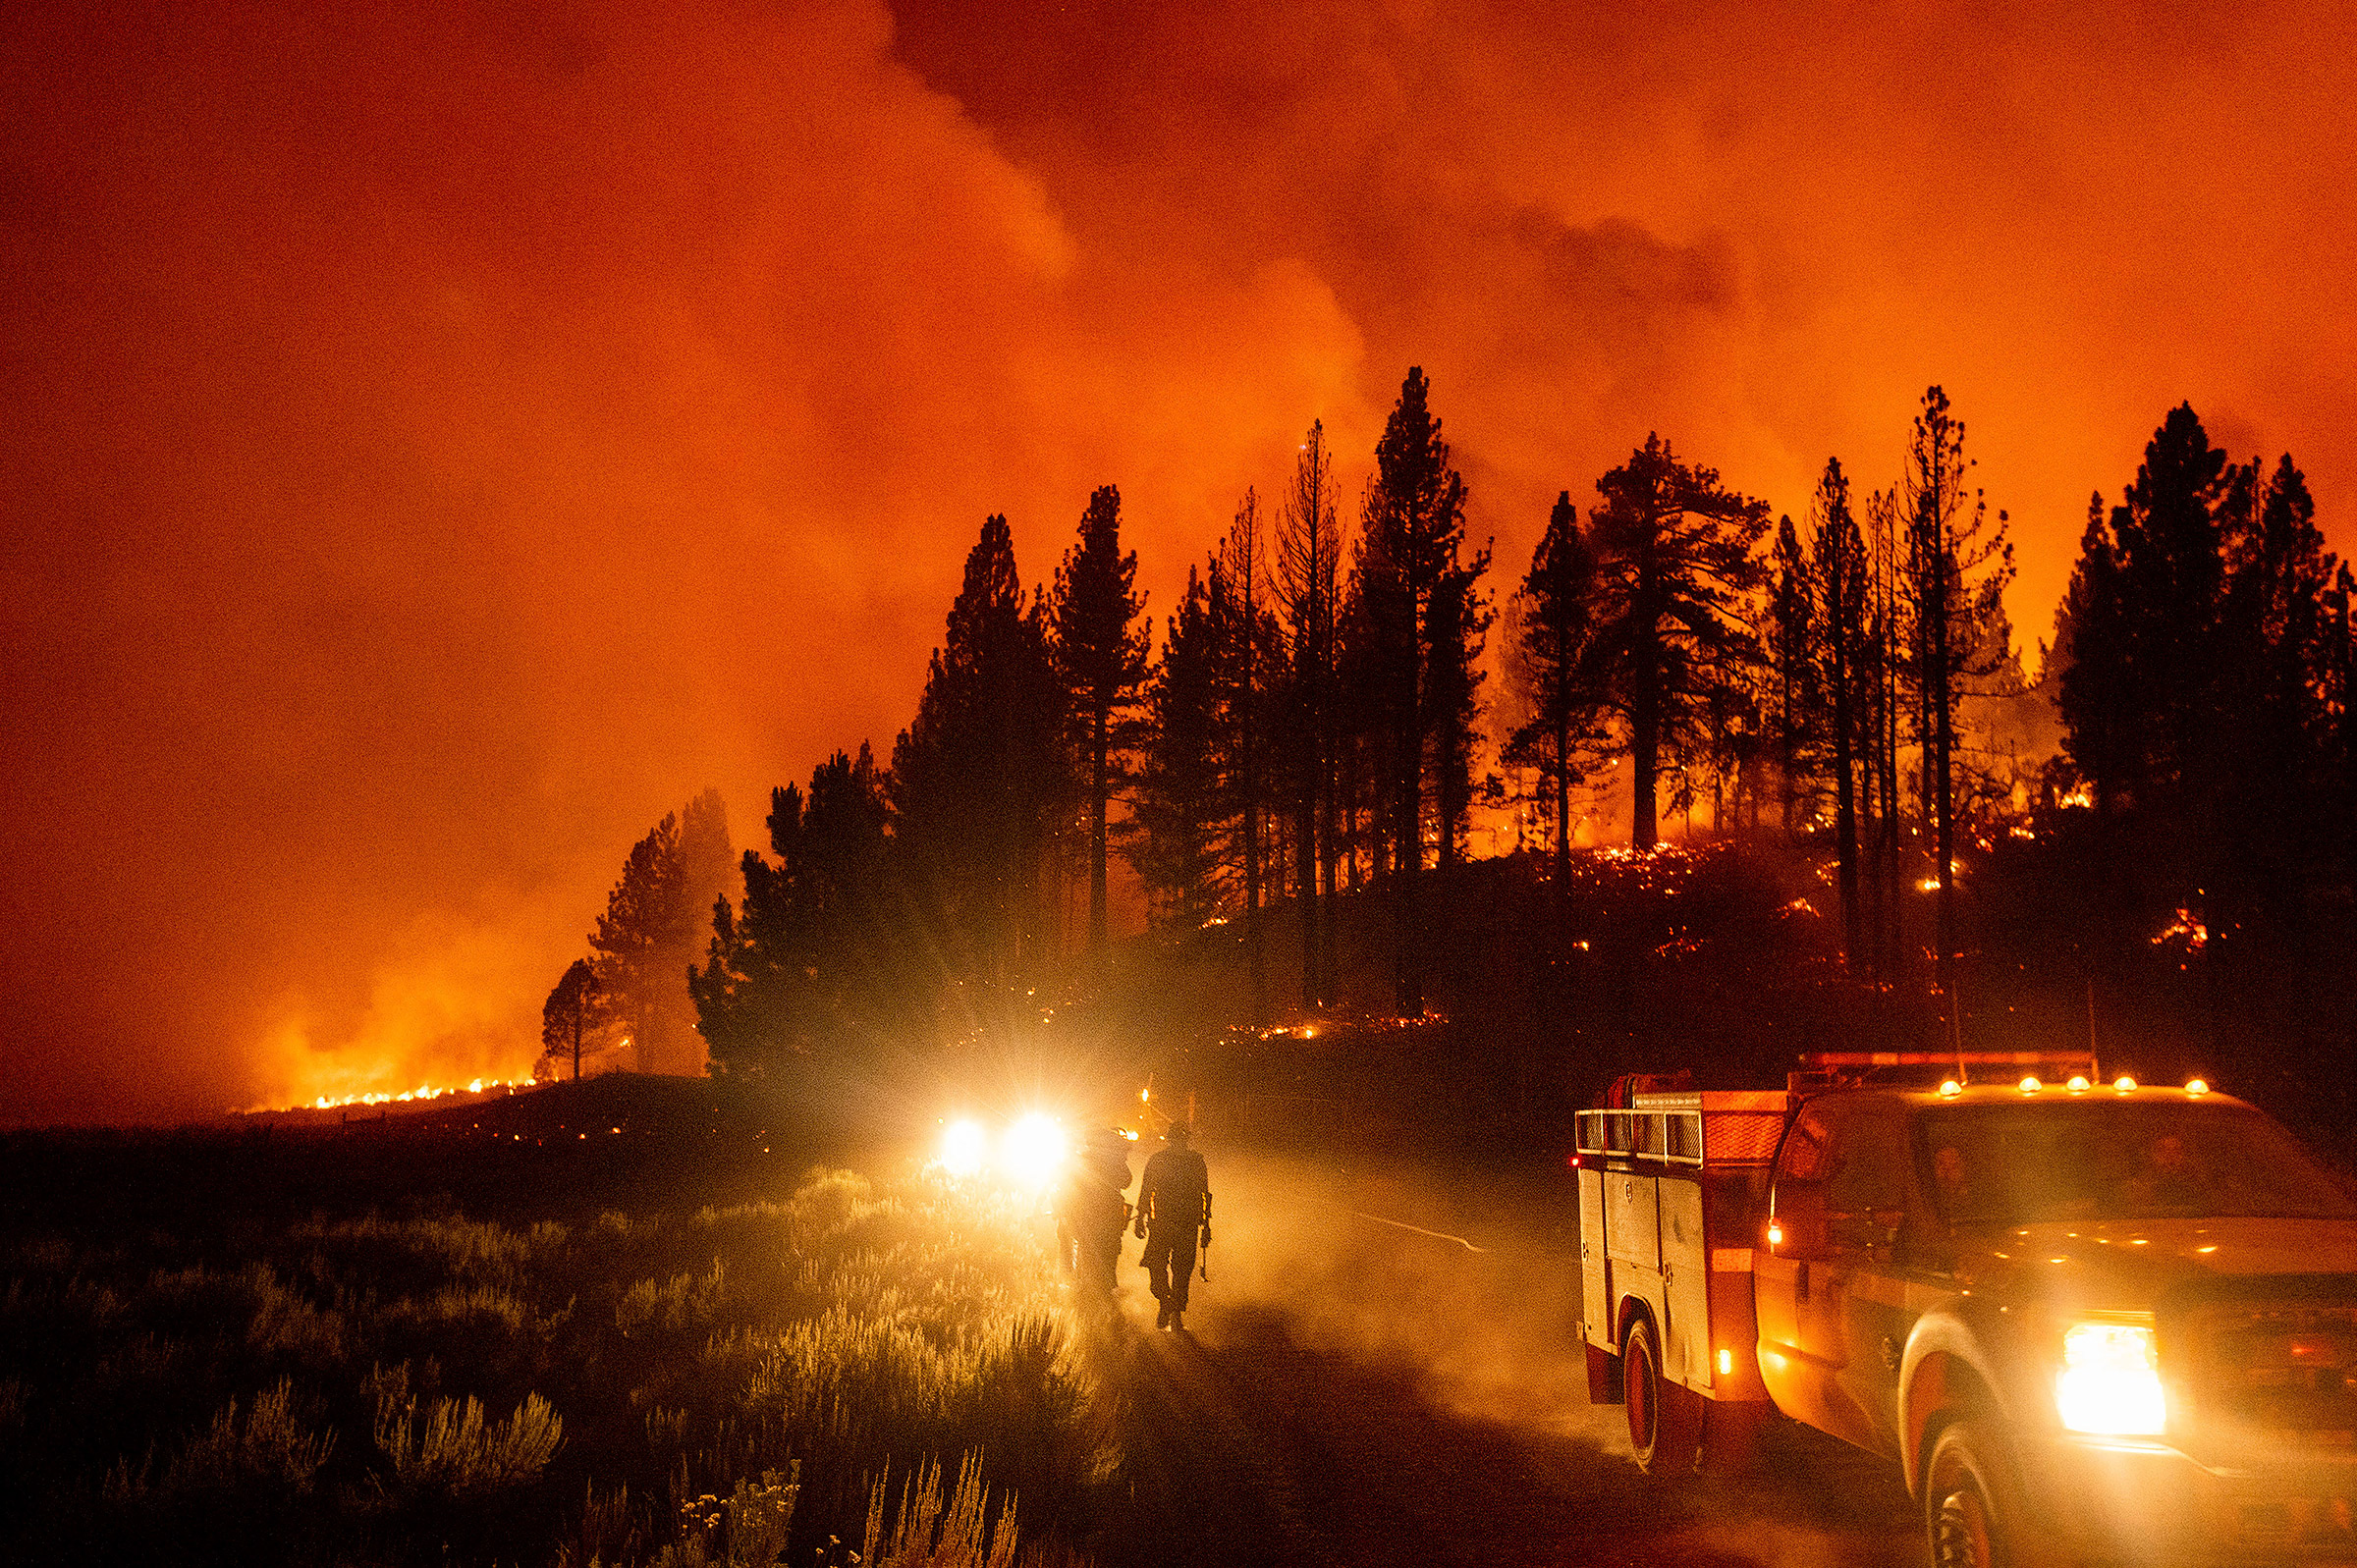 Firefighters battle the Sugar Fire, part of the Beckwourth Complex Fire, burning in Plumas National Forest, Calif., on July 8